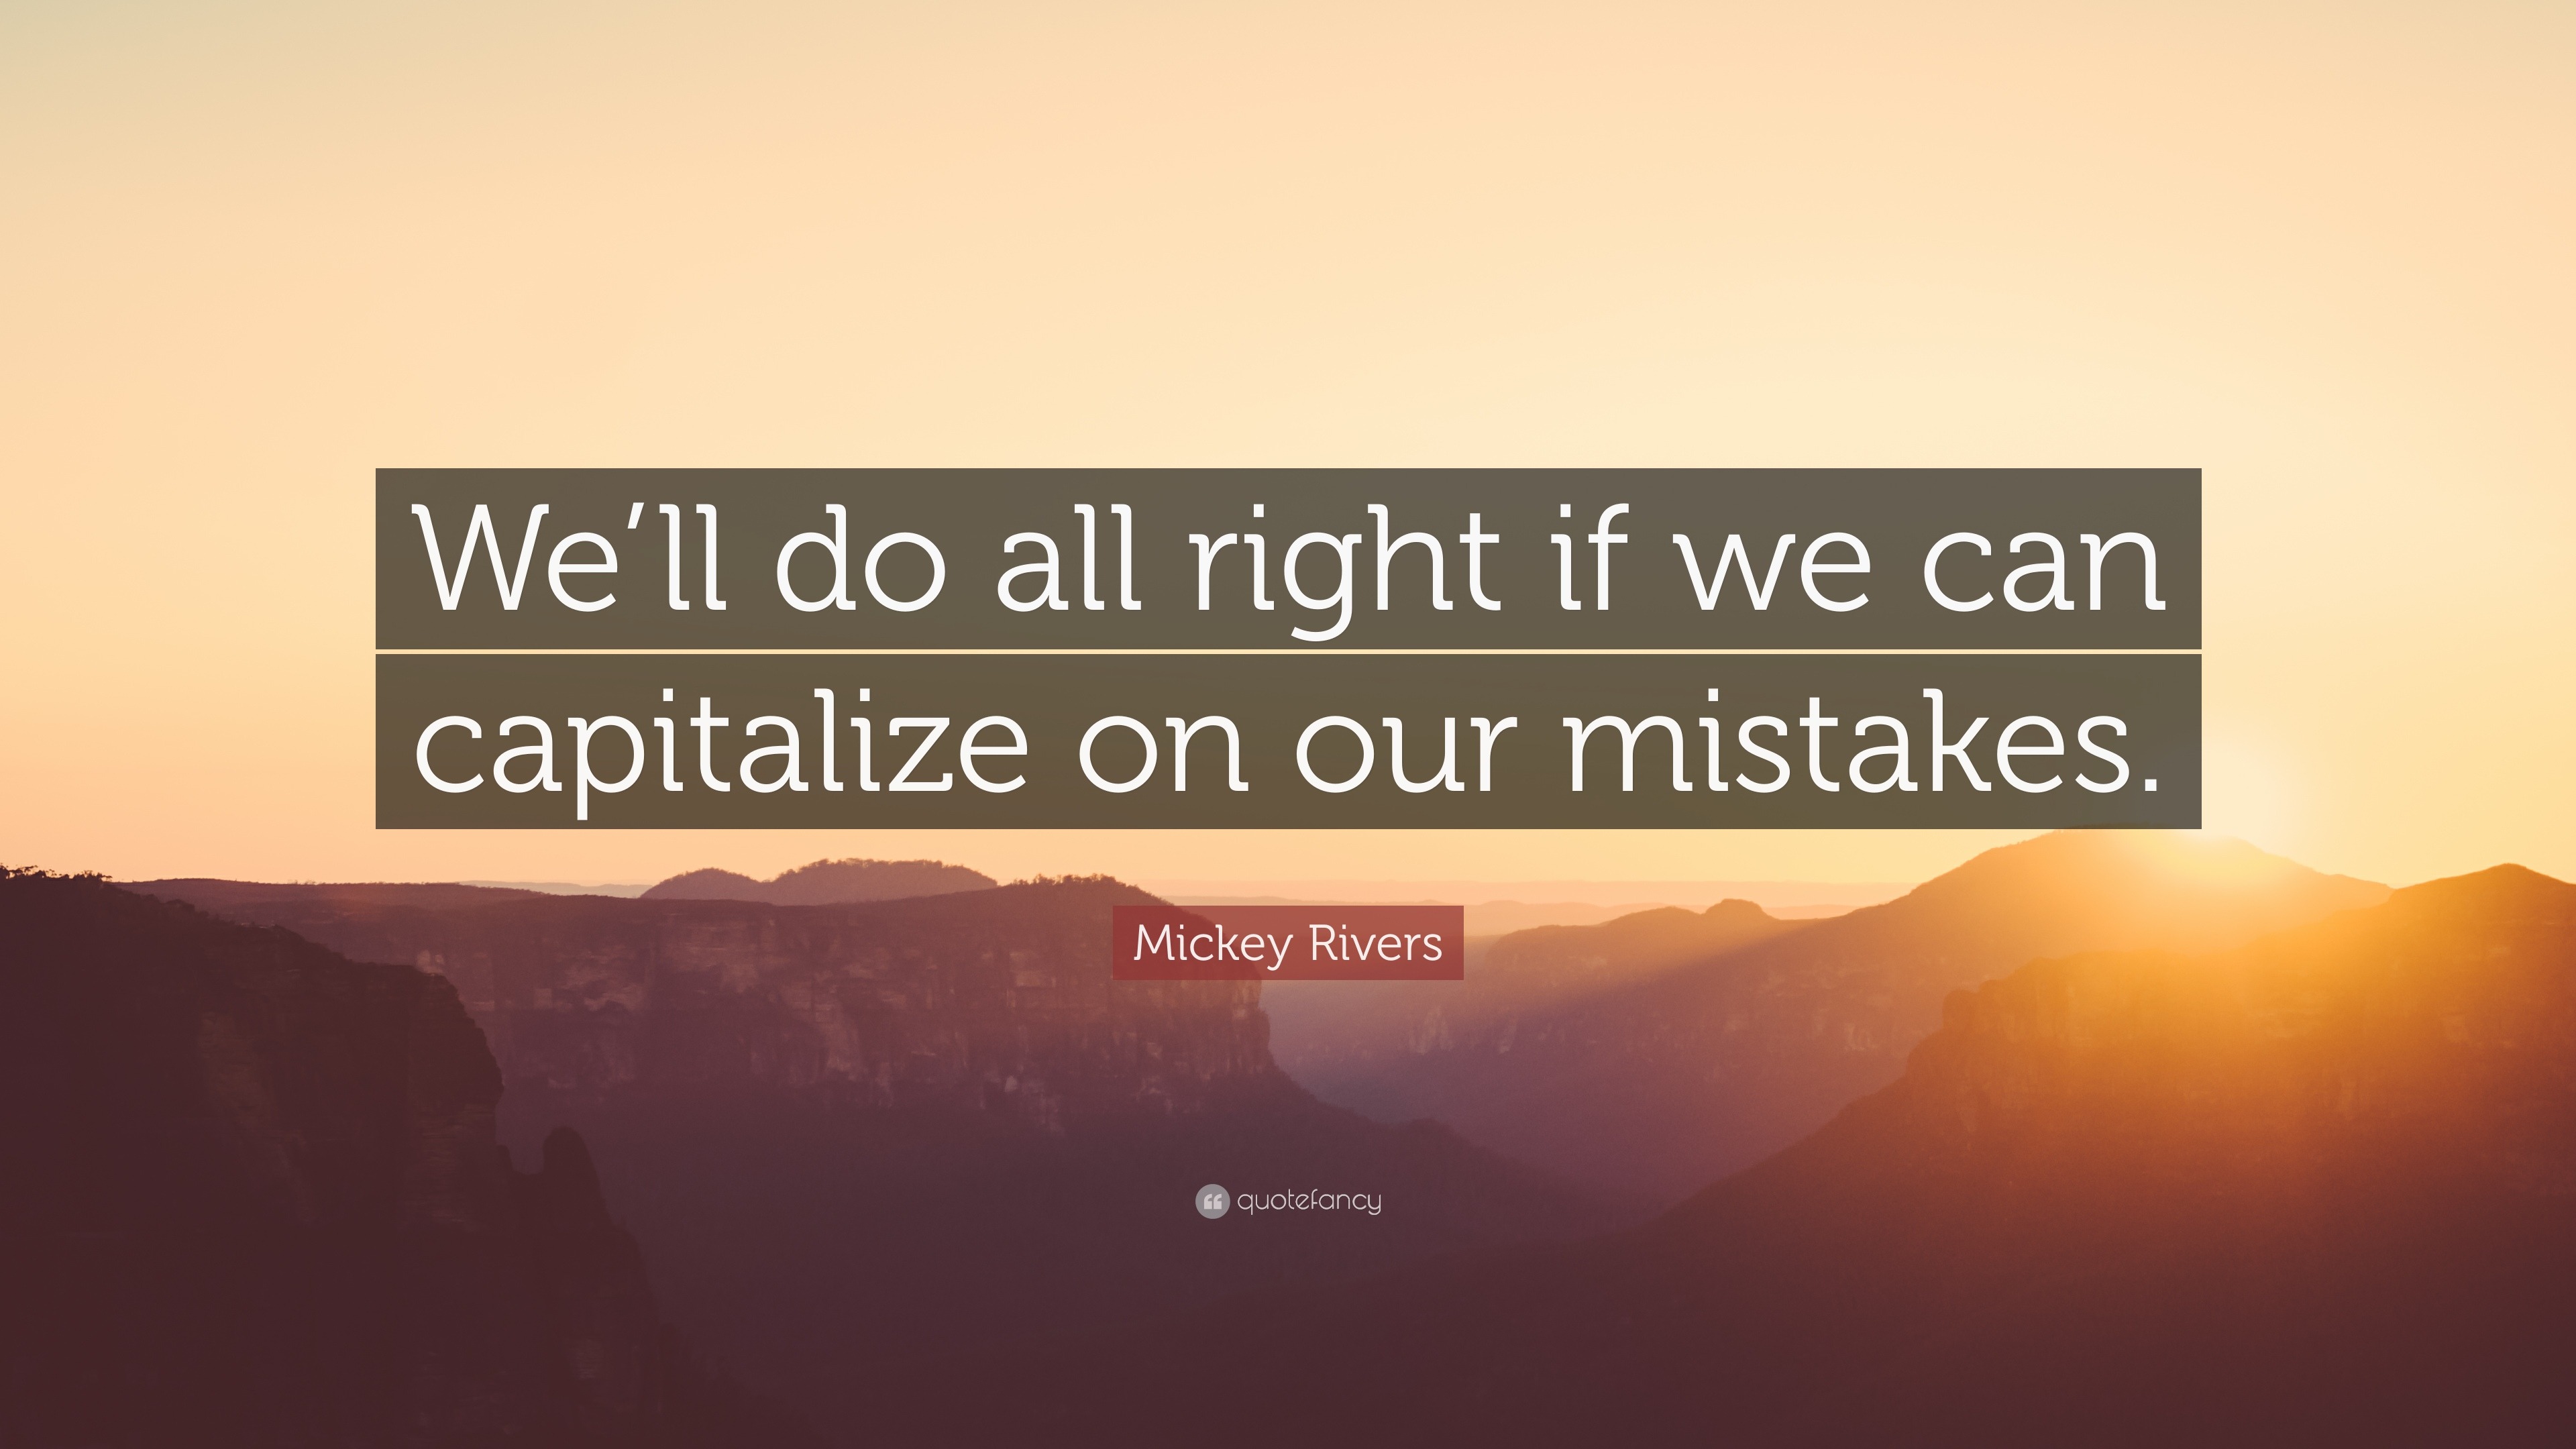 Top 10 Mickey Rivers Quotes (2023 Update) - Quotefancy